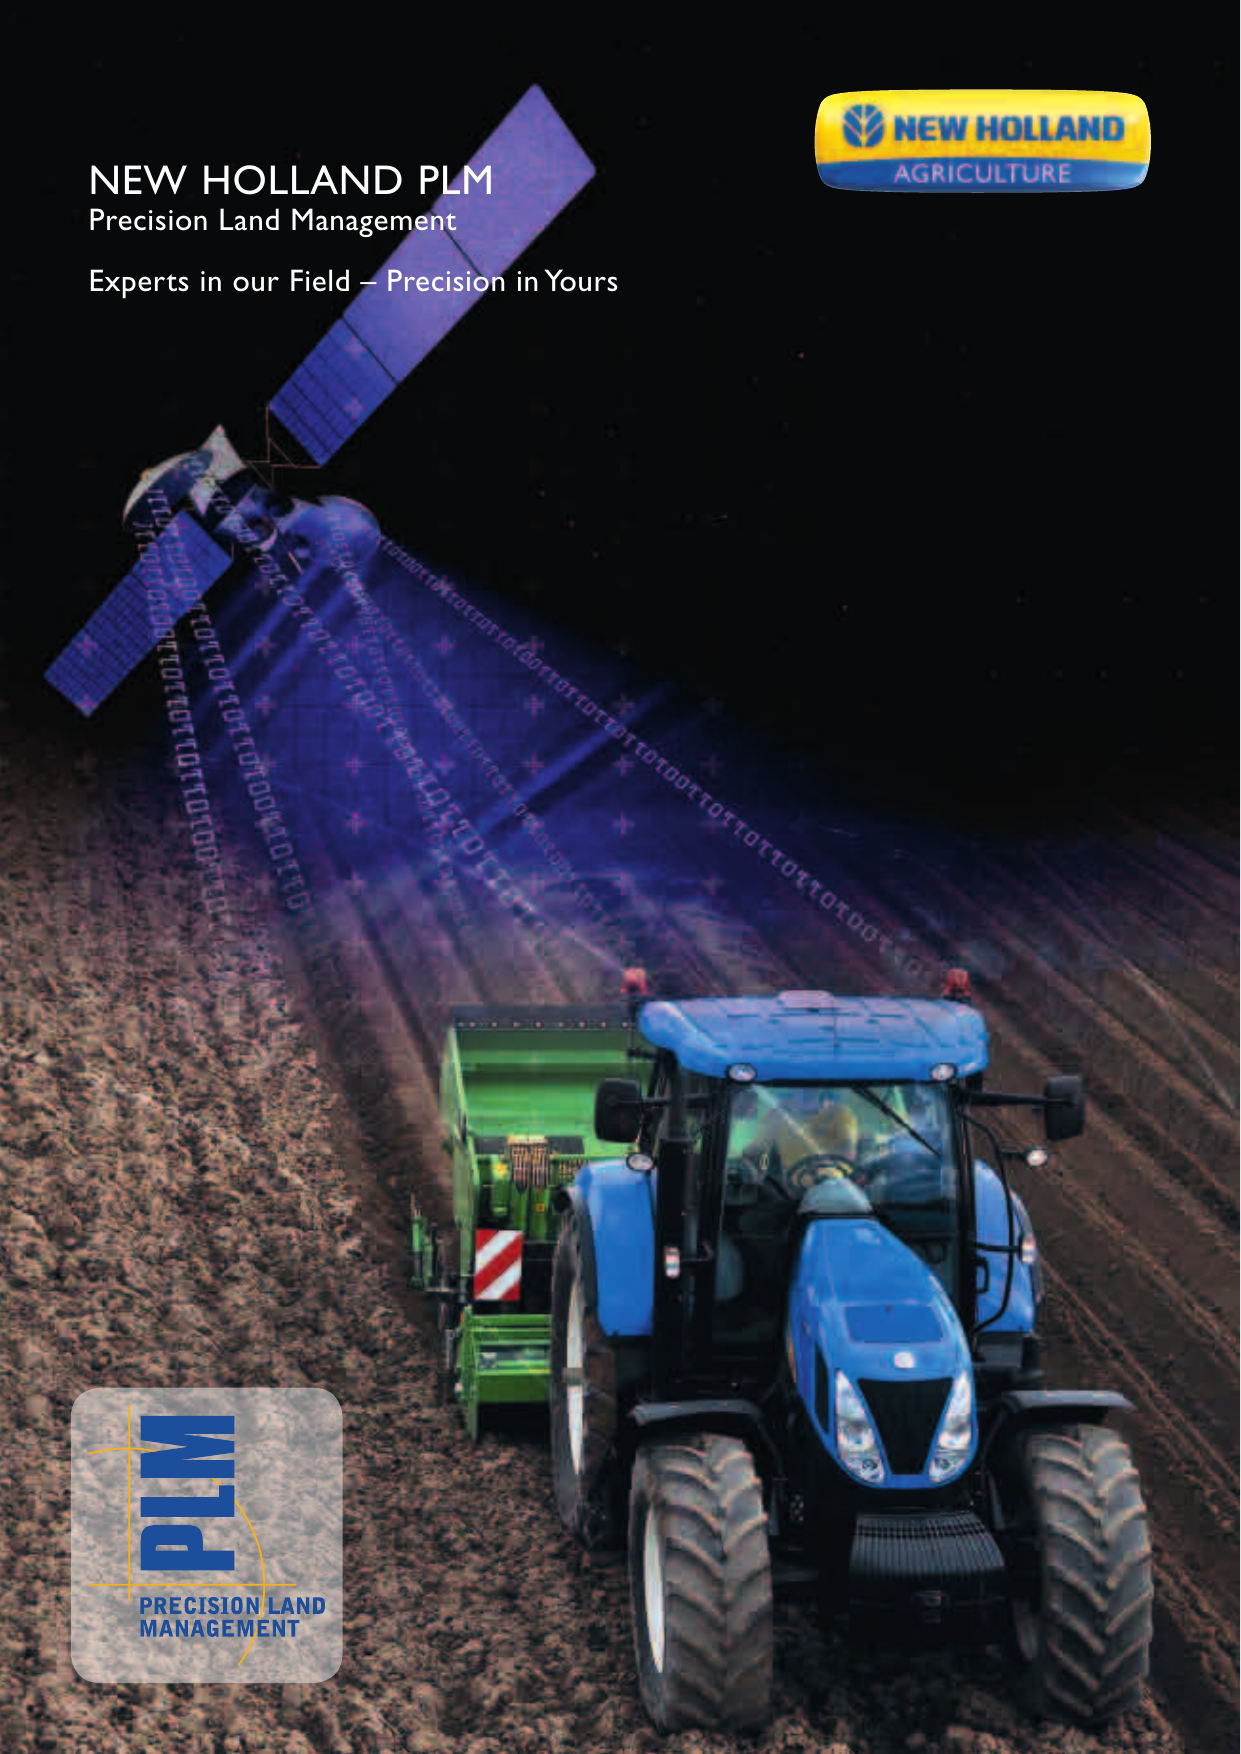 Page 1 of 11 - New-Holland New-Holland-Fm-1000-Users-Manual-  New-holland-fm-1000-users-manual